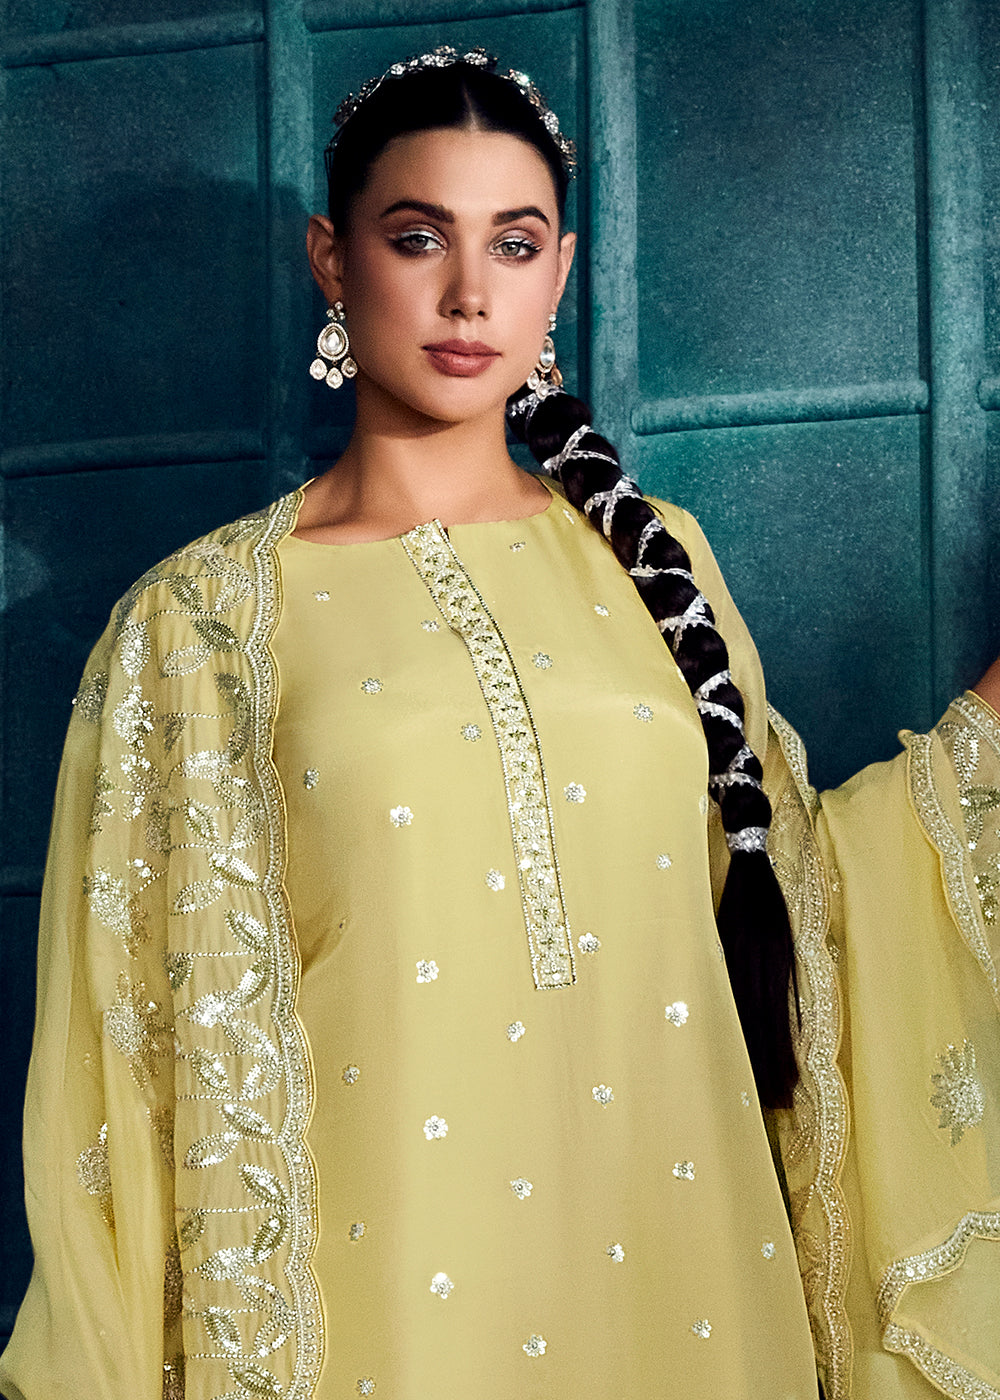 Buy Now Pastel Yellow Modale Silk Embroidered Festive Salwar Suit Online in USA, UK, Canada, Germany, Australia & Worldwide at Empress Clothing.